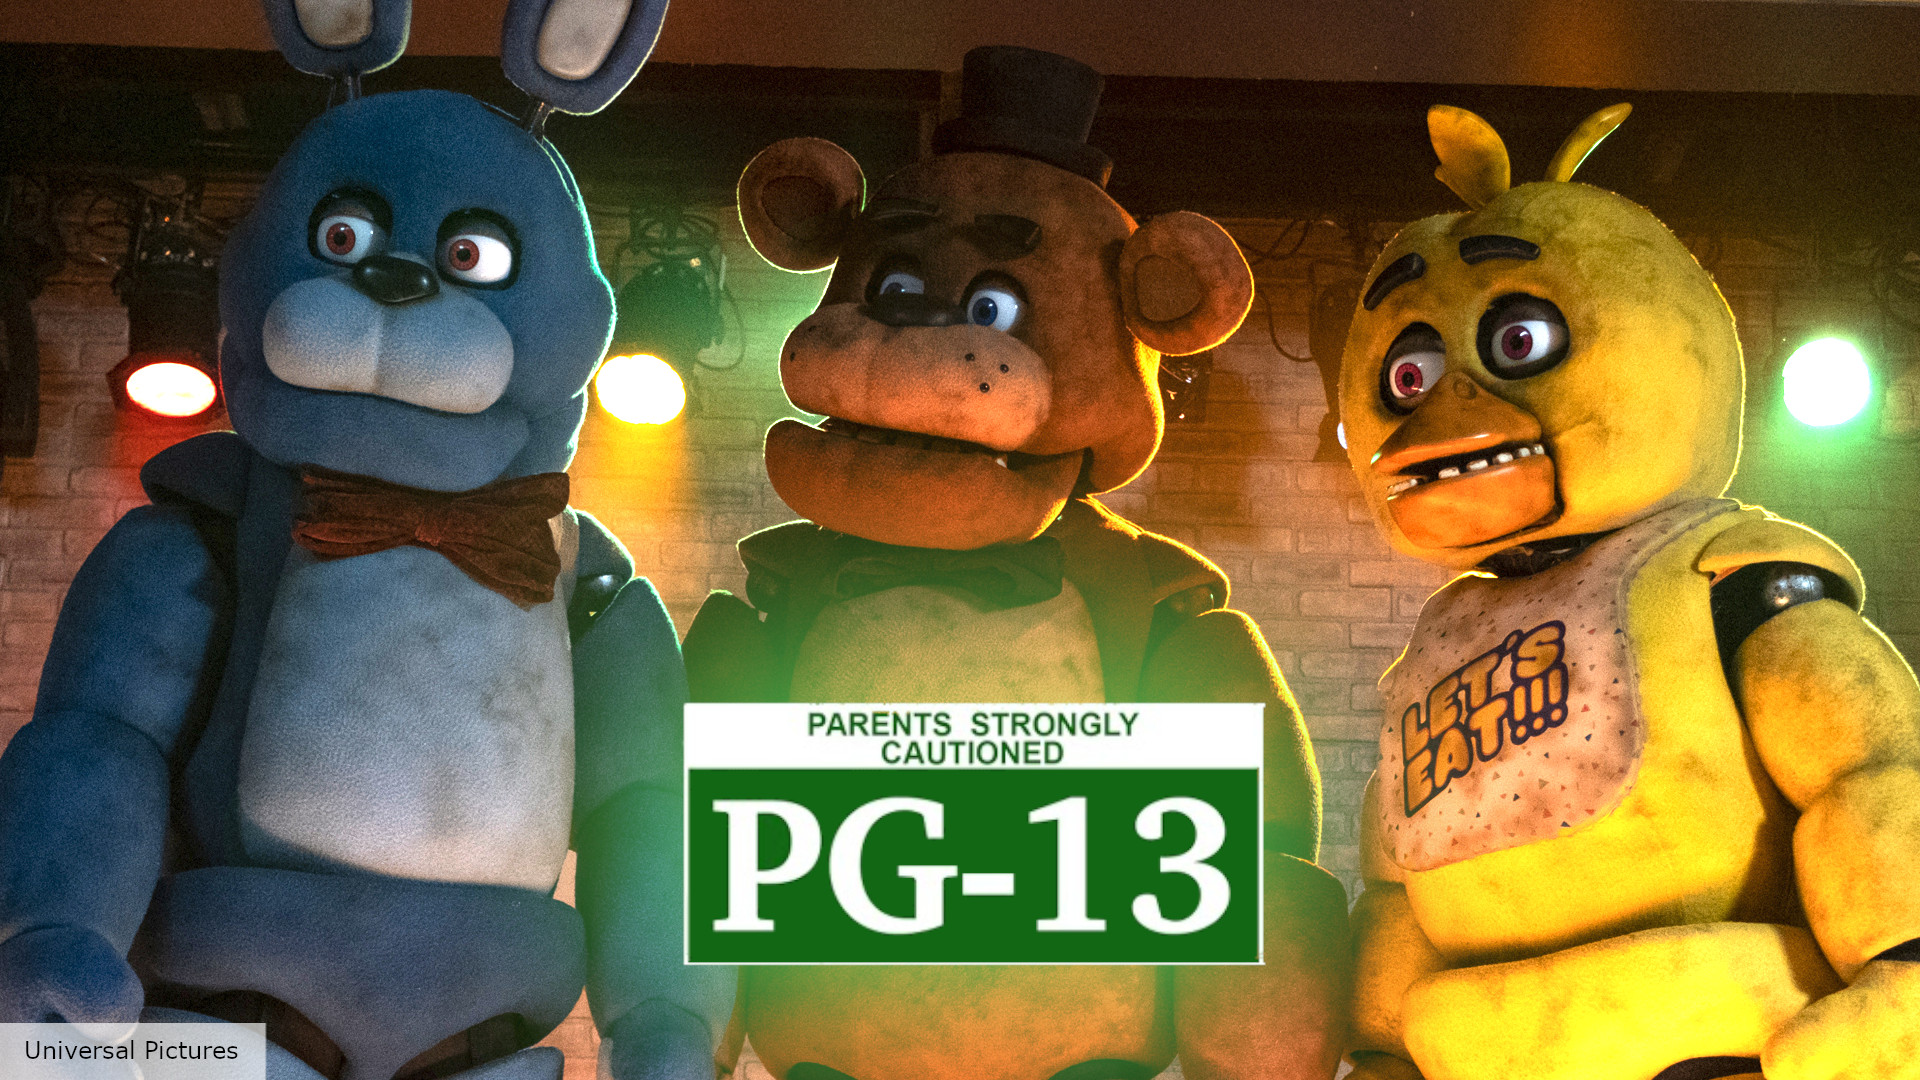 Fans should calm down about FNAF age rating, PG13 horror can be great